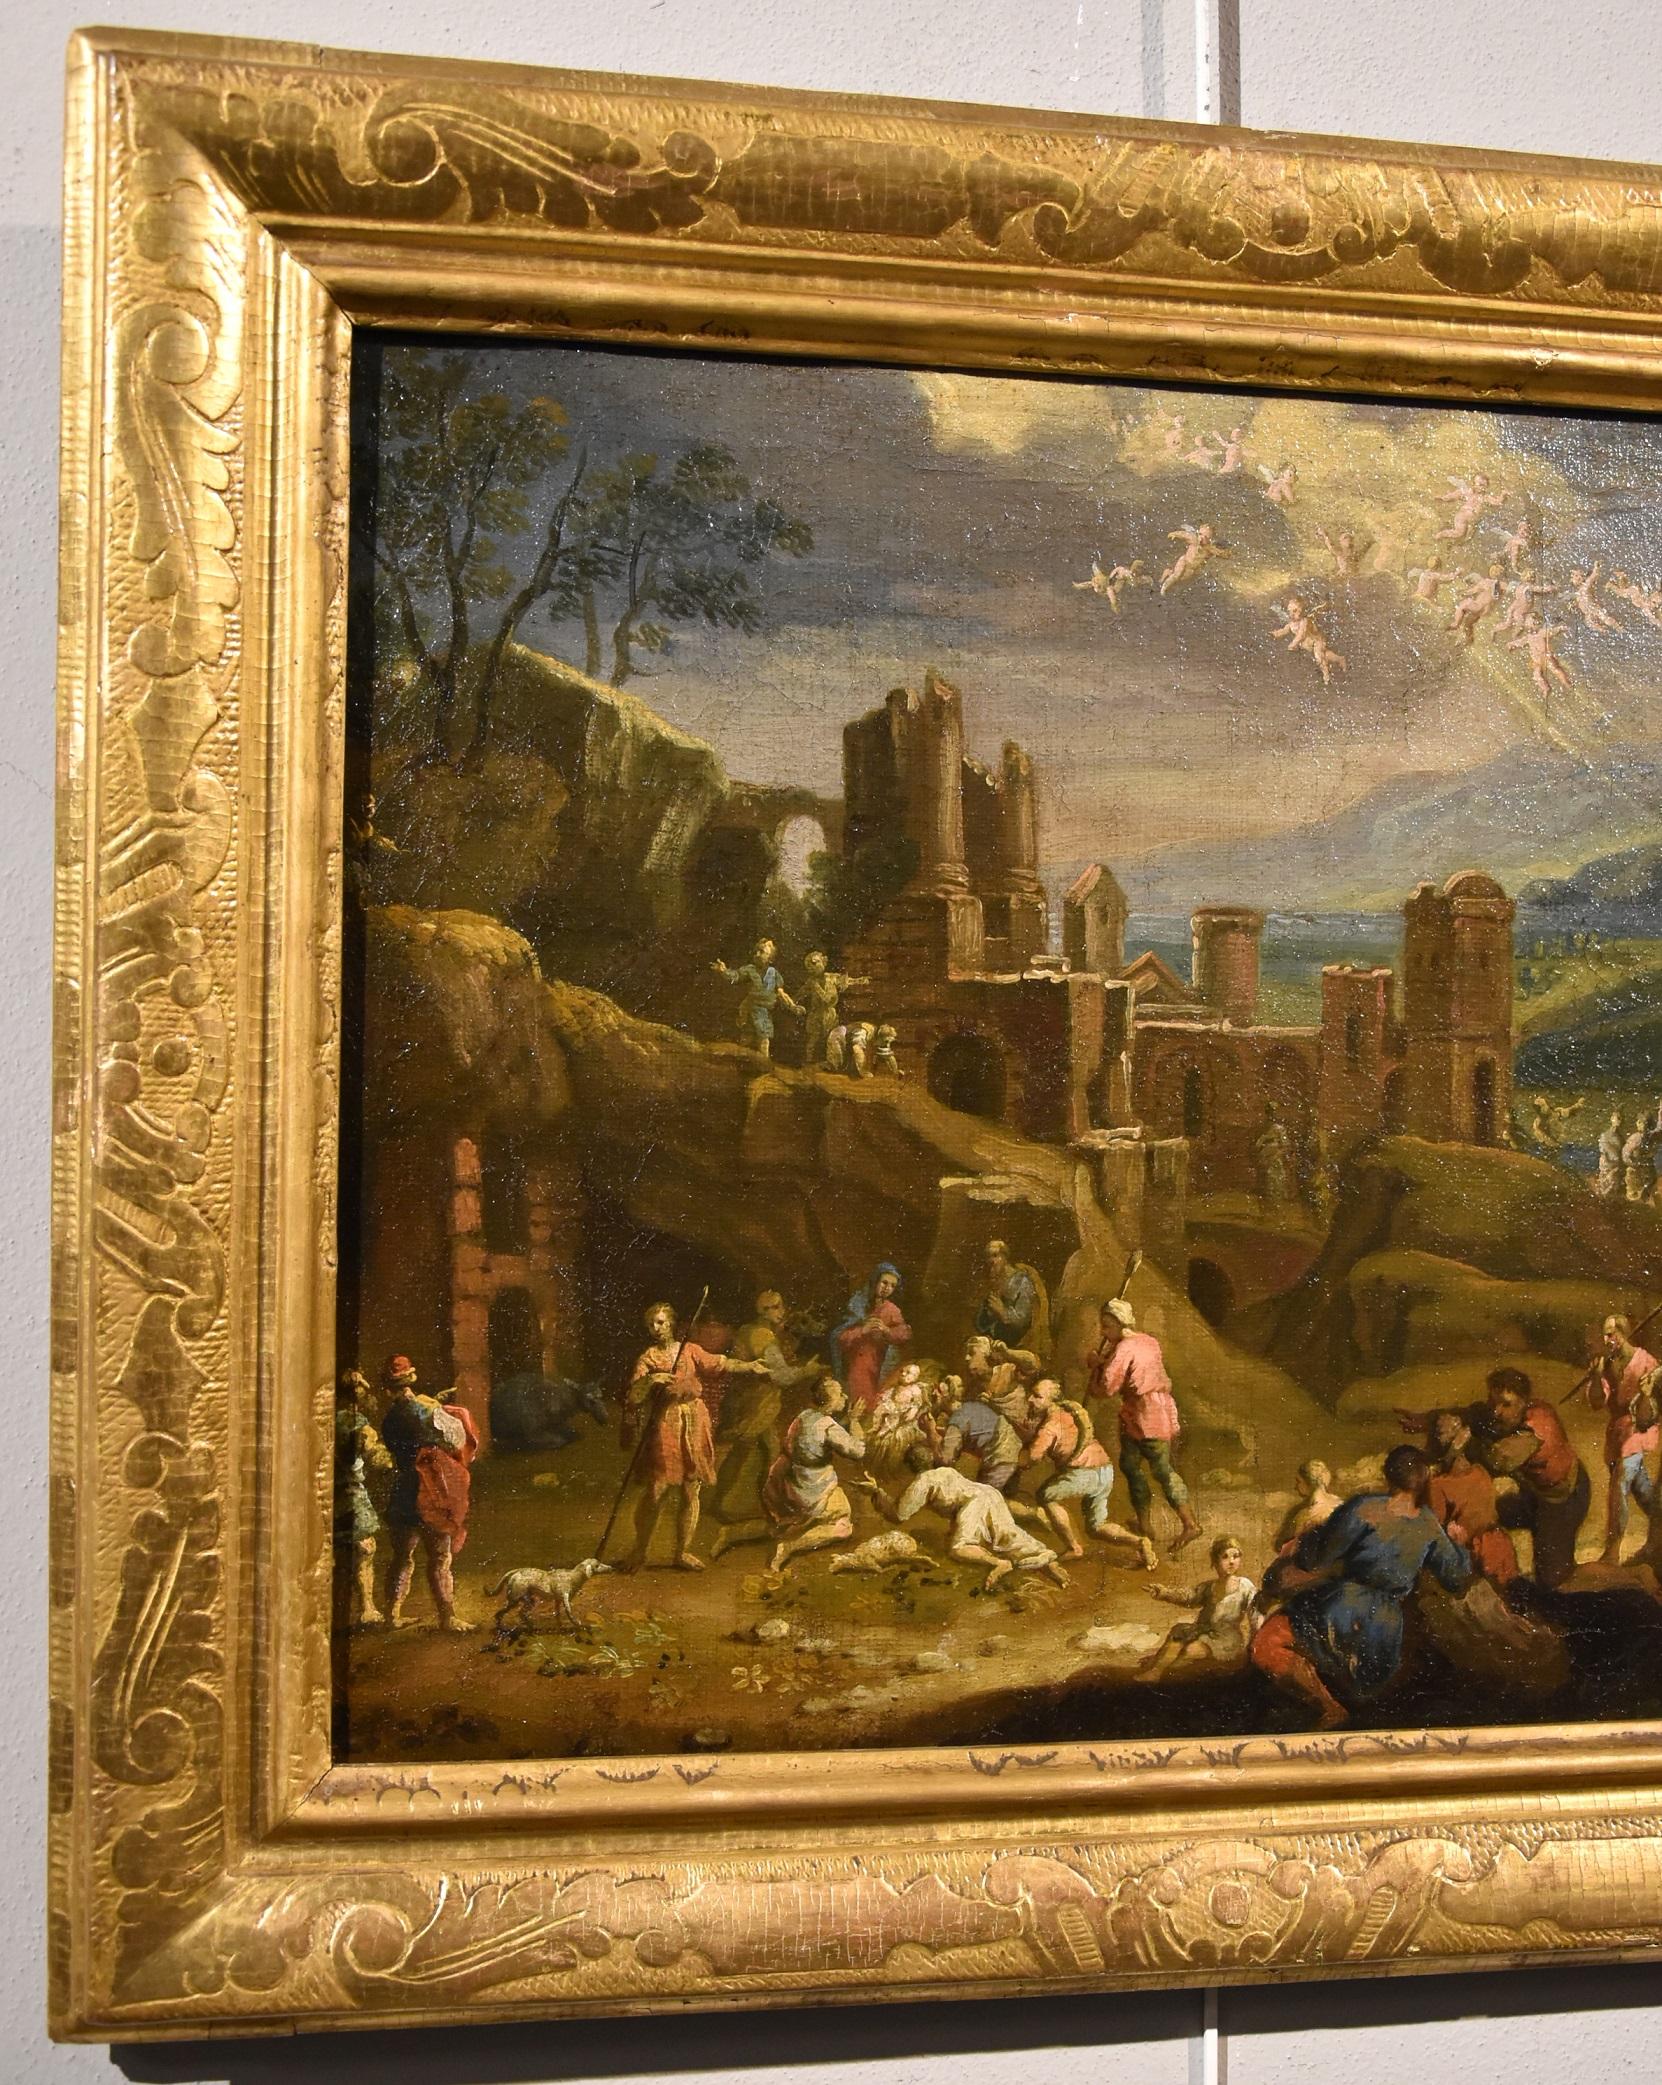 Landscape Nativity Religious Paint Oil on canvas Old master 17th Century Italian - Painting by Scipione Compagni, or Compagno (Naples, about 1624 - after 1680)